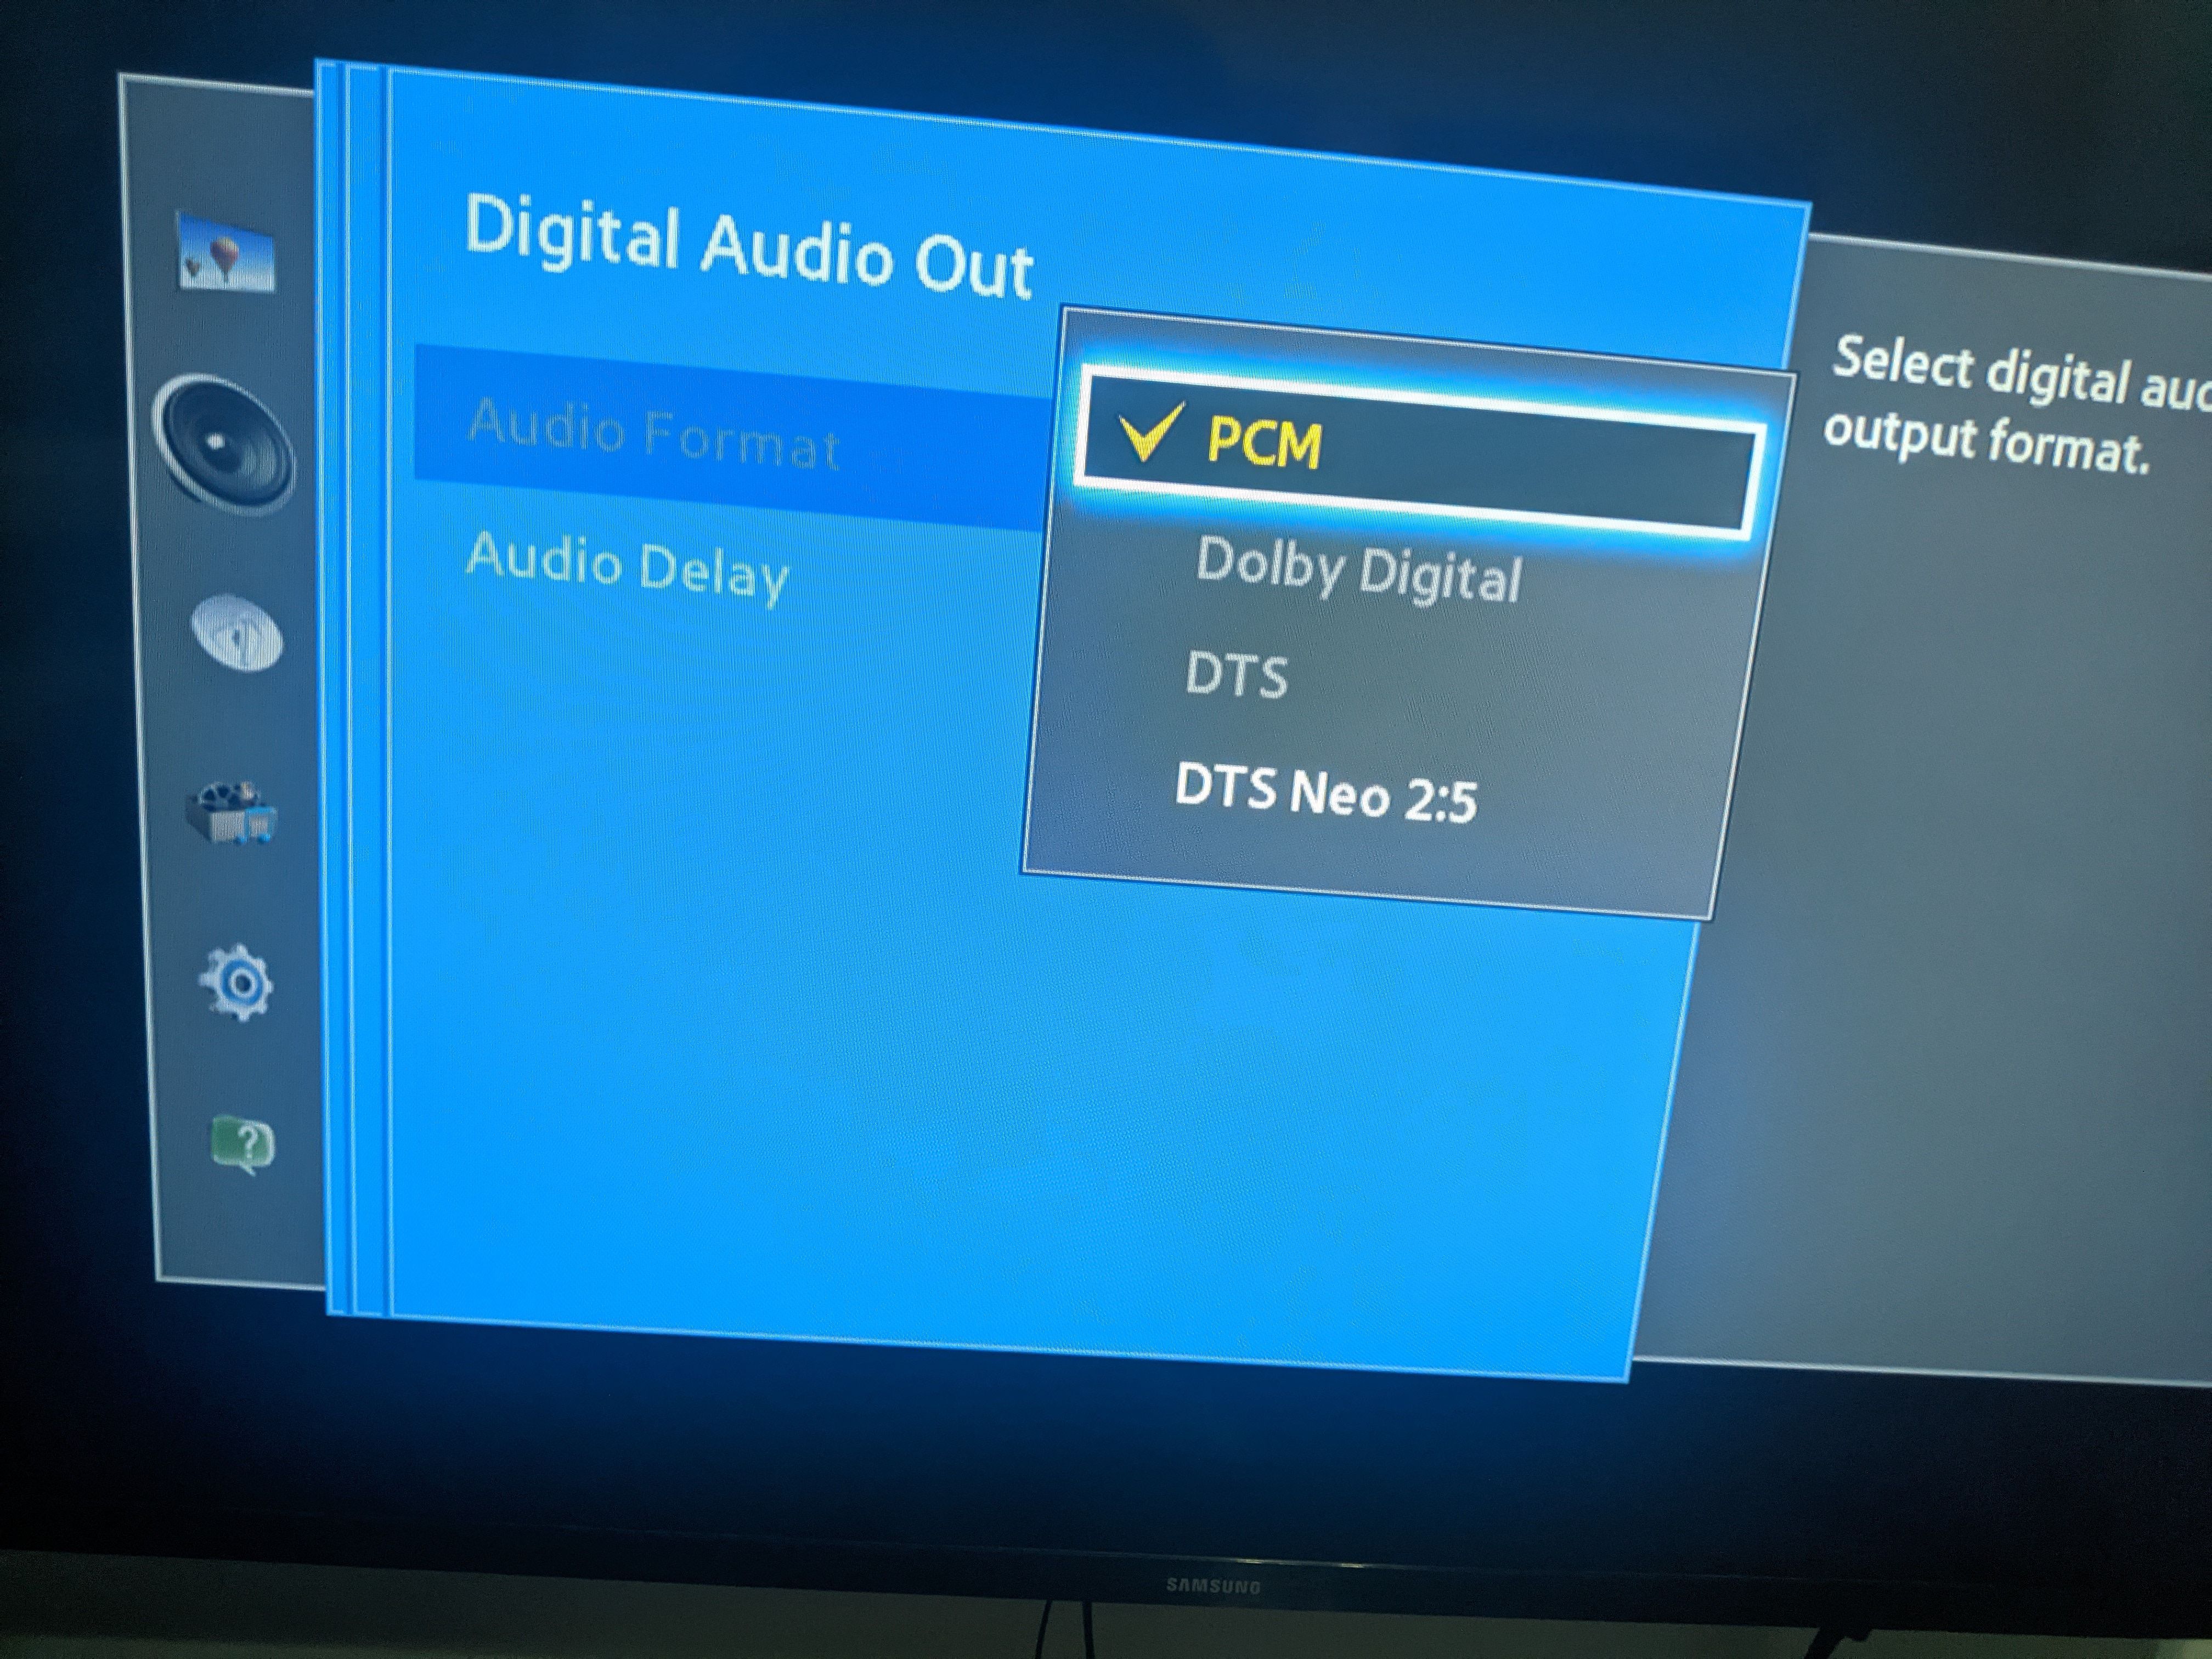 Samsung TV: Do You Need a Digital Audio Out Optical Cable?